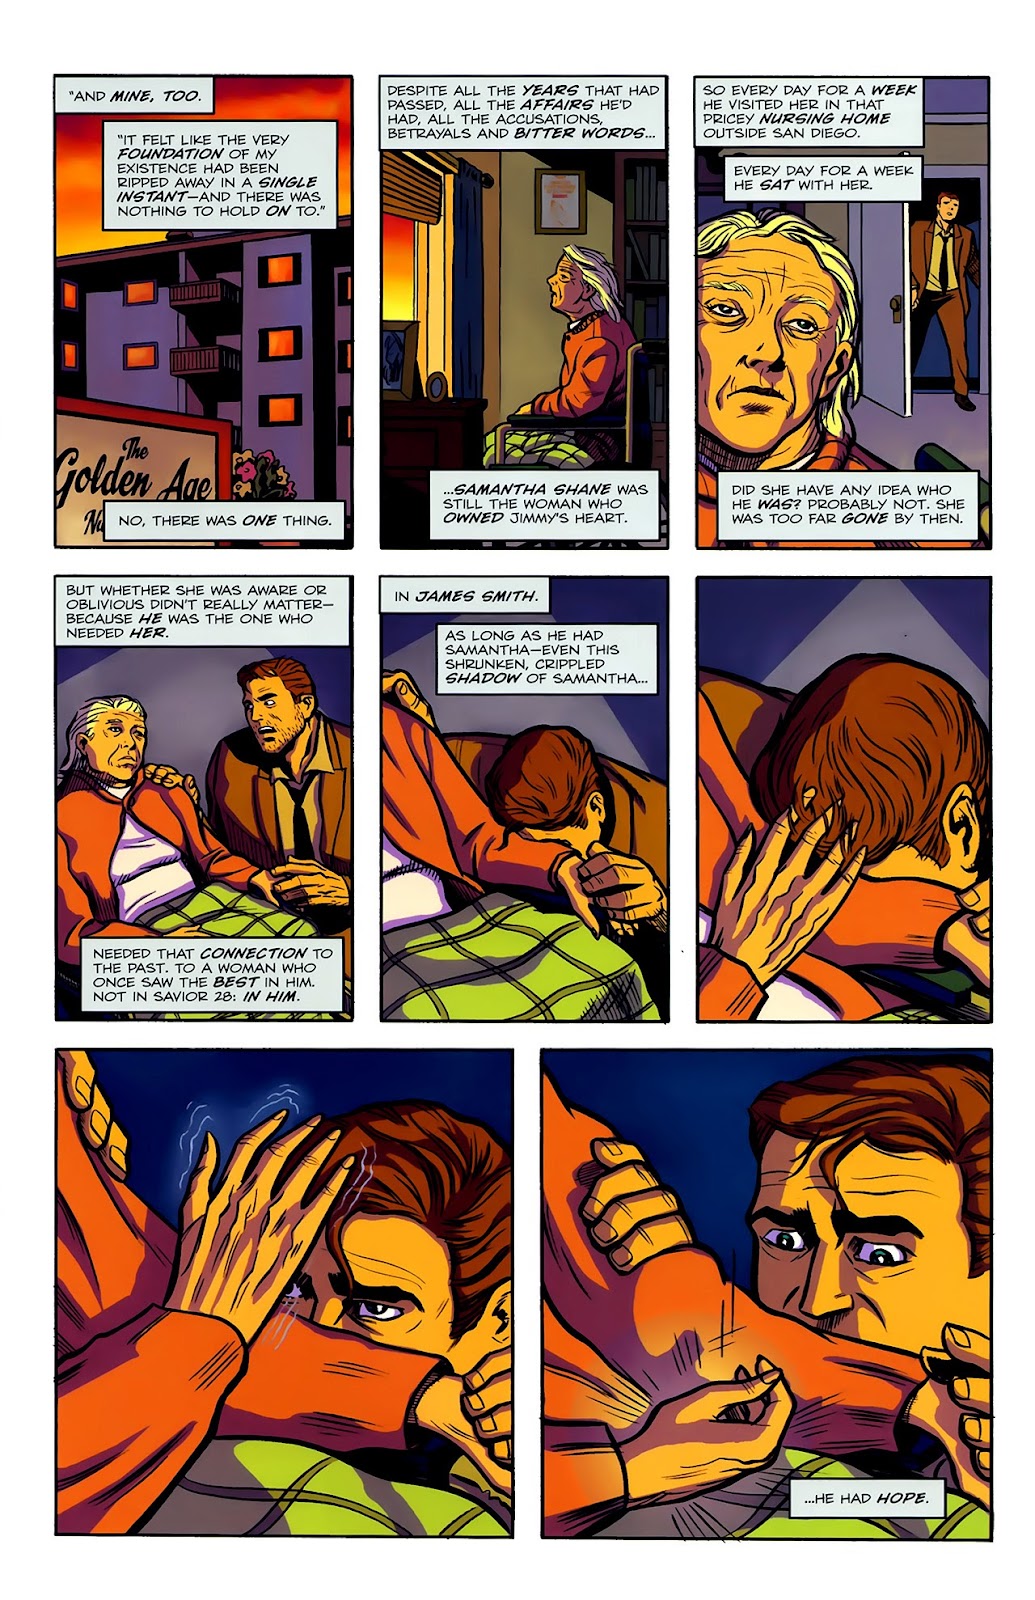 The Life and Times of Savior 28 issue 1 - Page 19